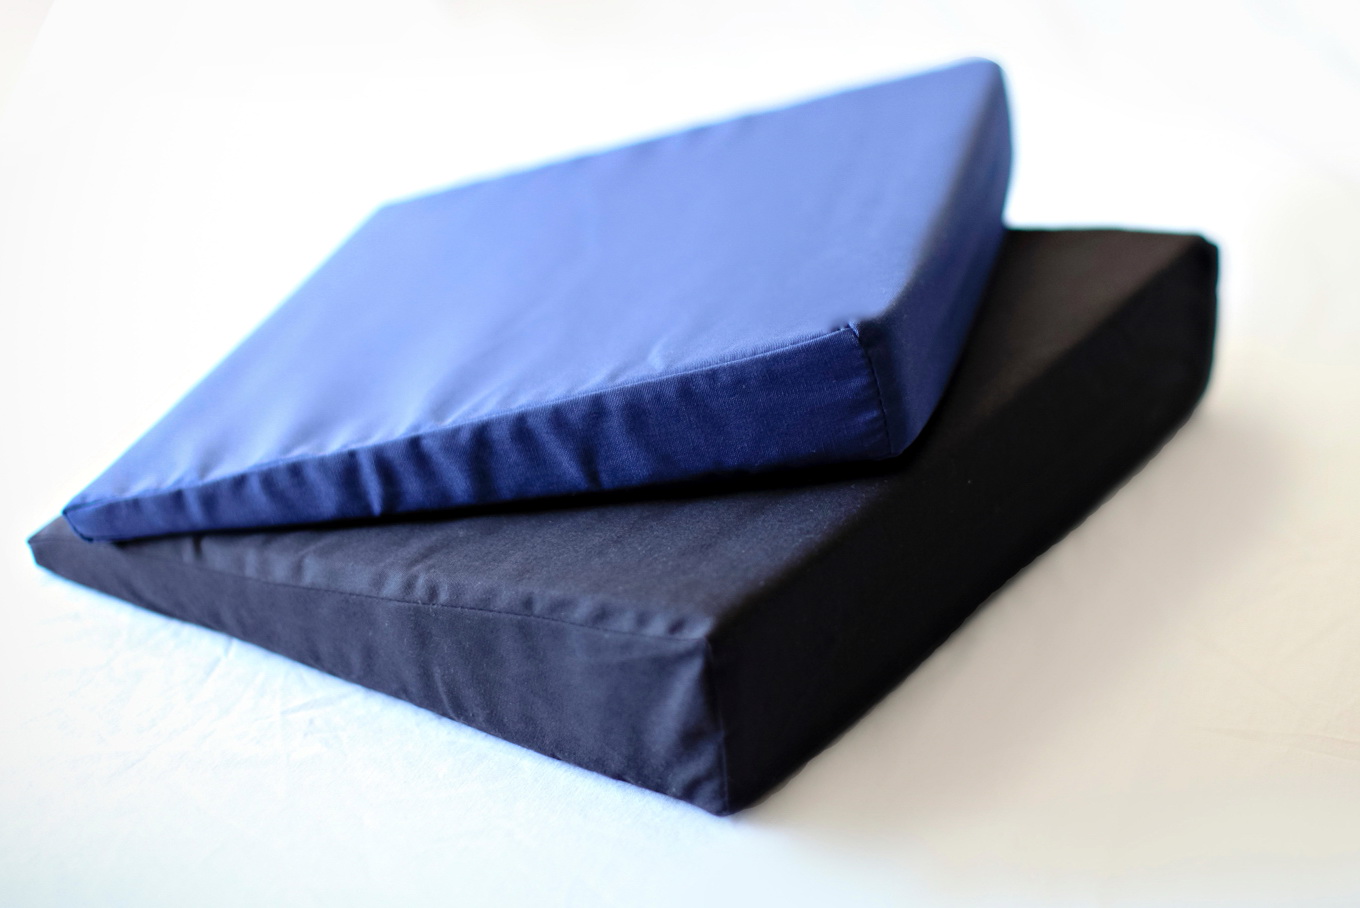 Seat Cushion For Back Pain Relief | Home Design Ideas